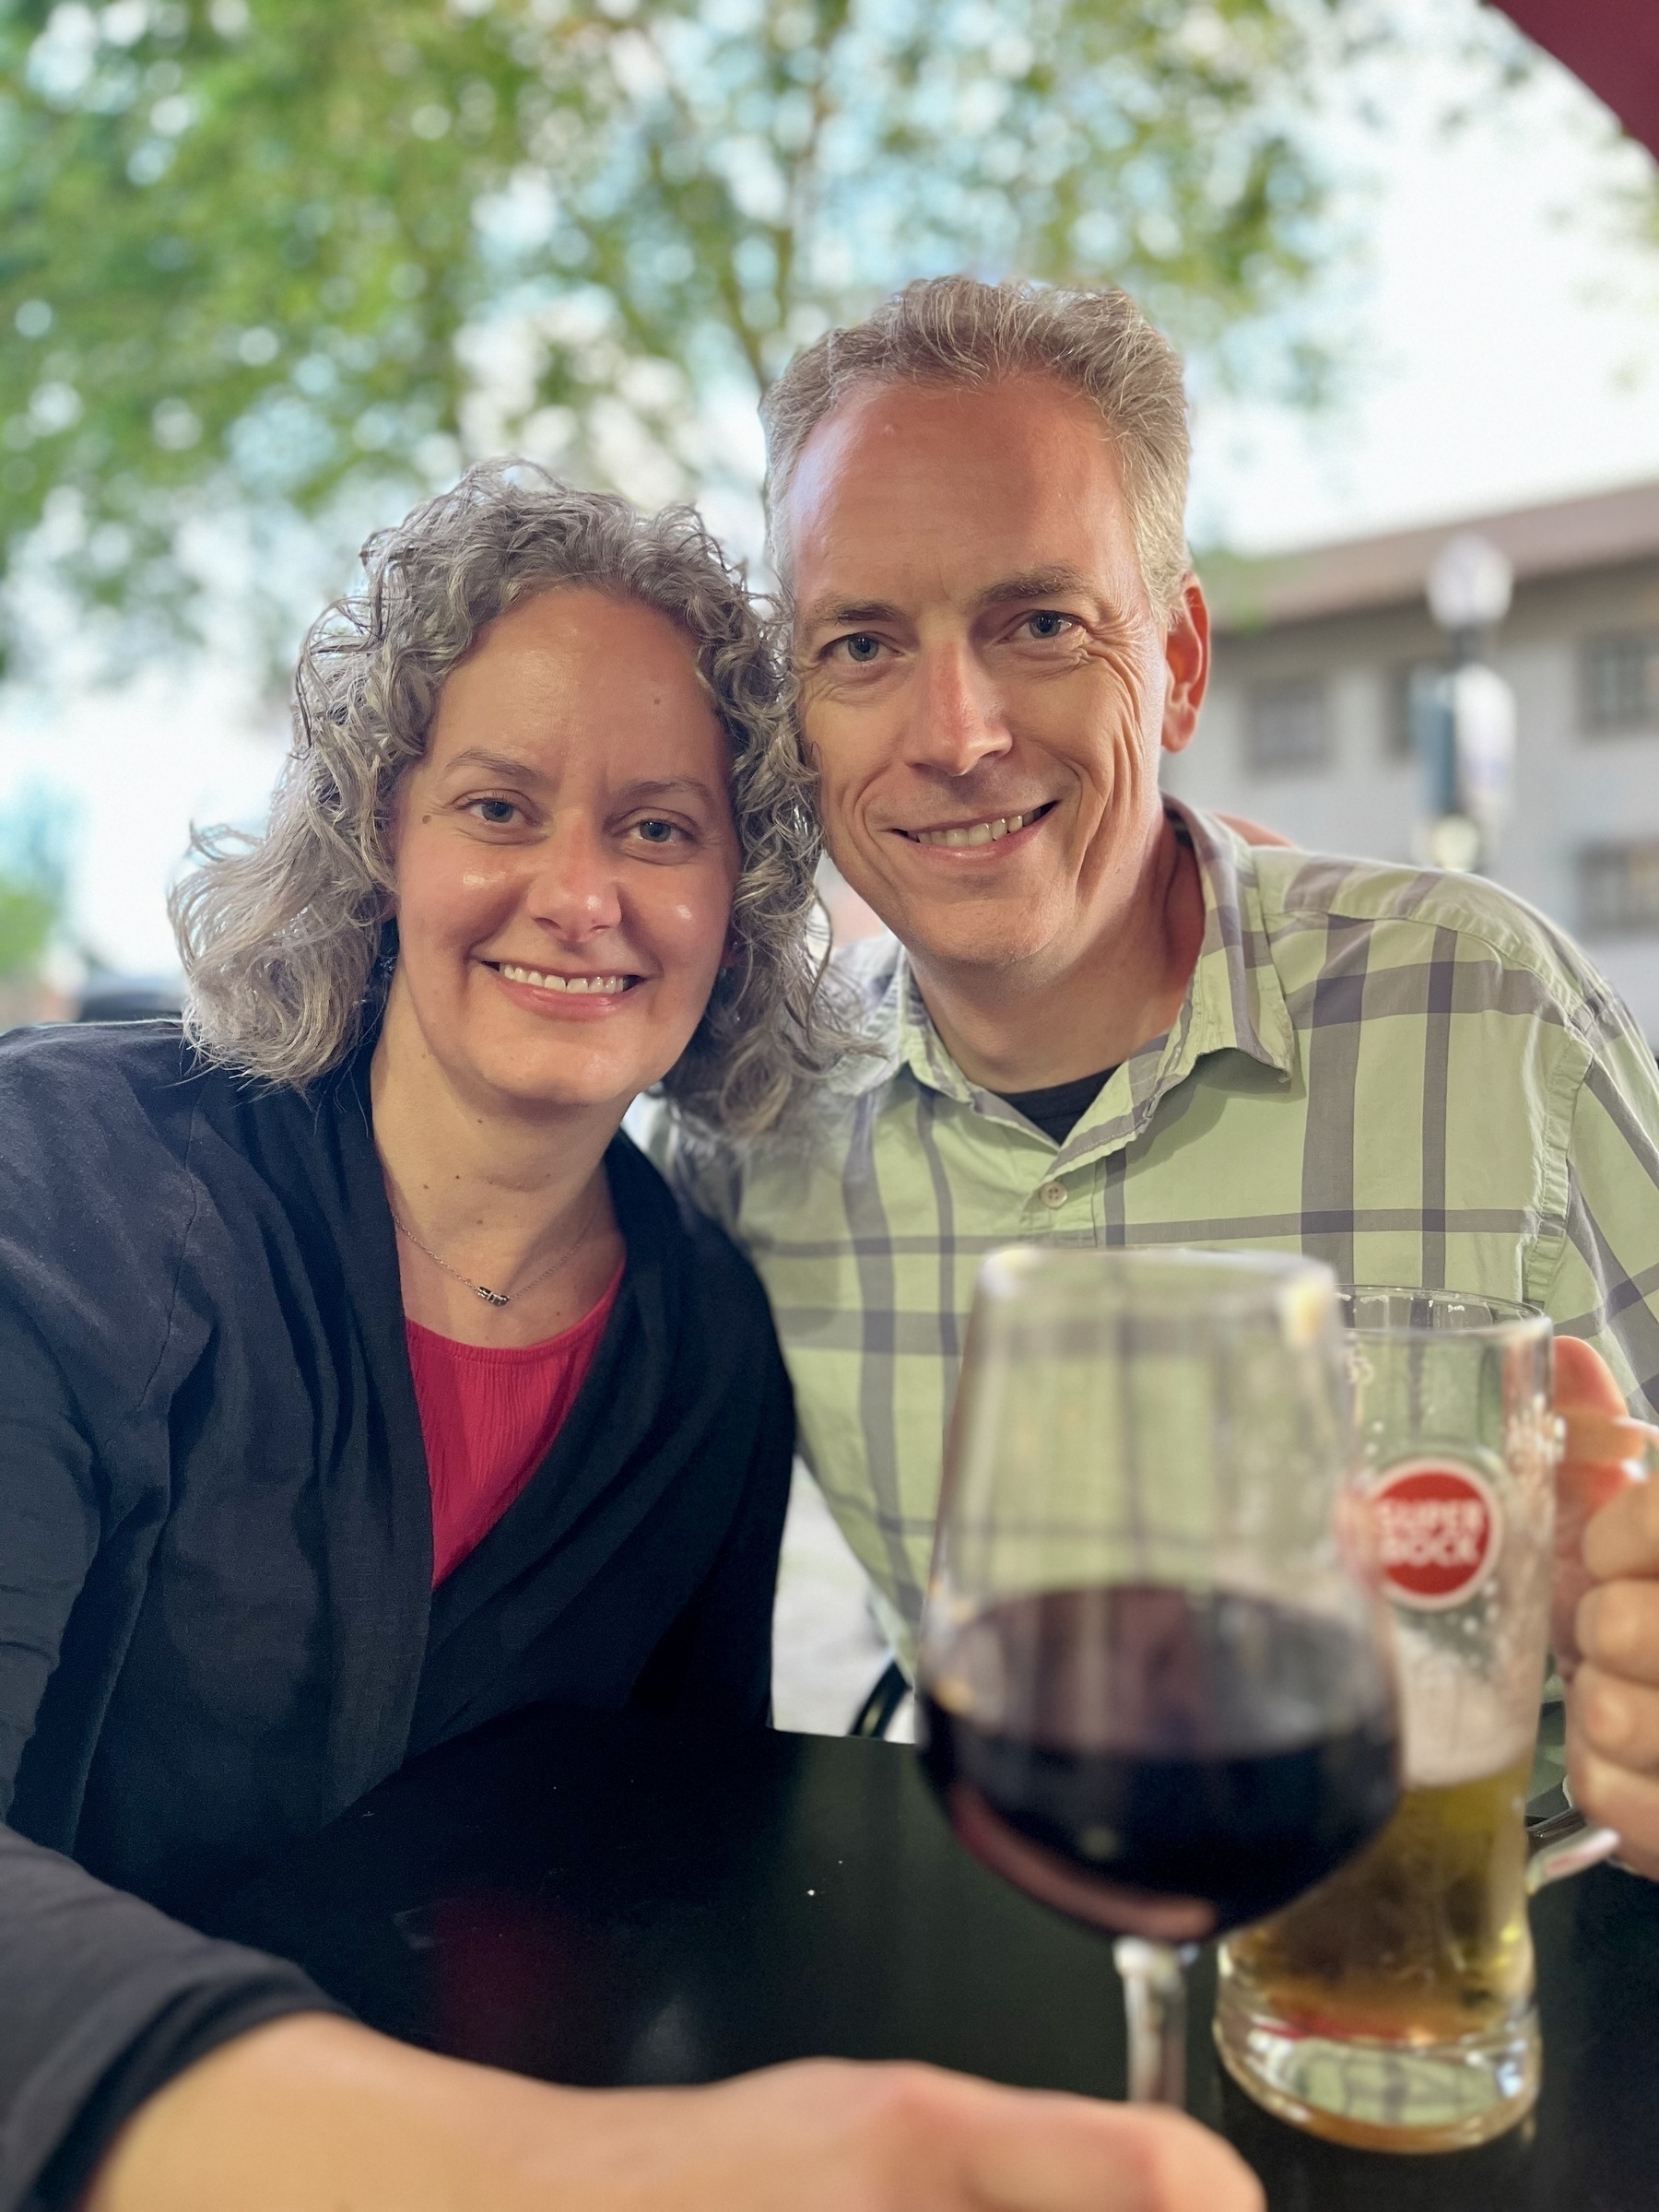 A smiling man and woman pose closely, with glasses of wine and beer on a table in front, at an outdoor seating area.